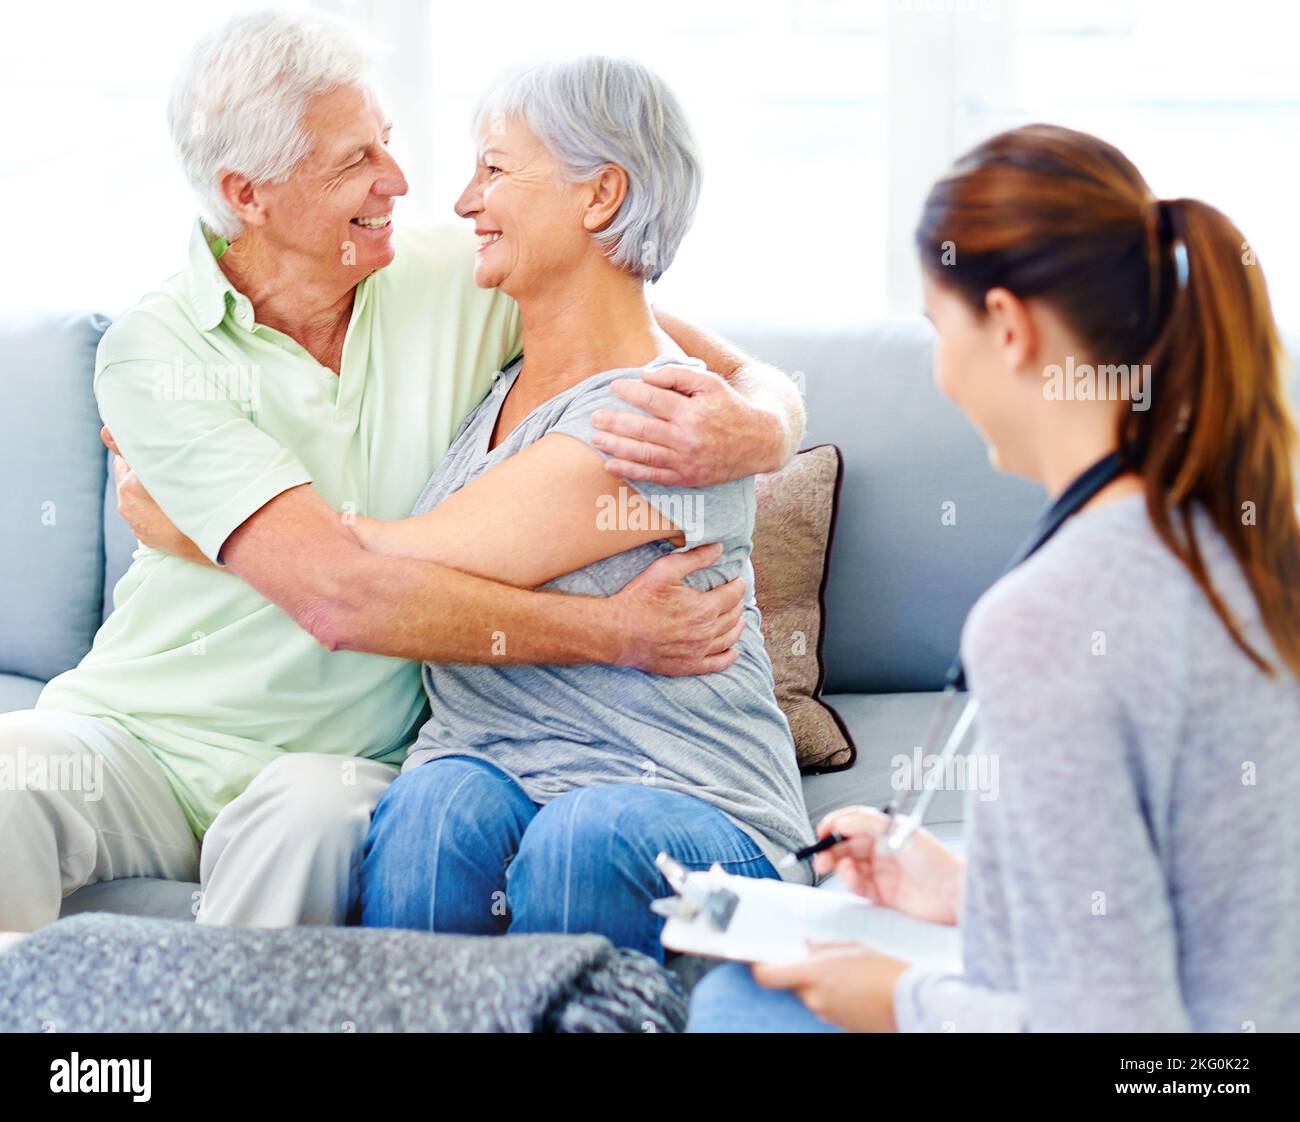 Its going to be okay now. A doctor explaining positive test results to an overjoyed senior patient and her husband. Stock Photo